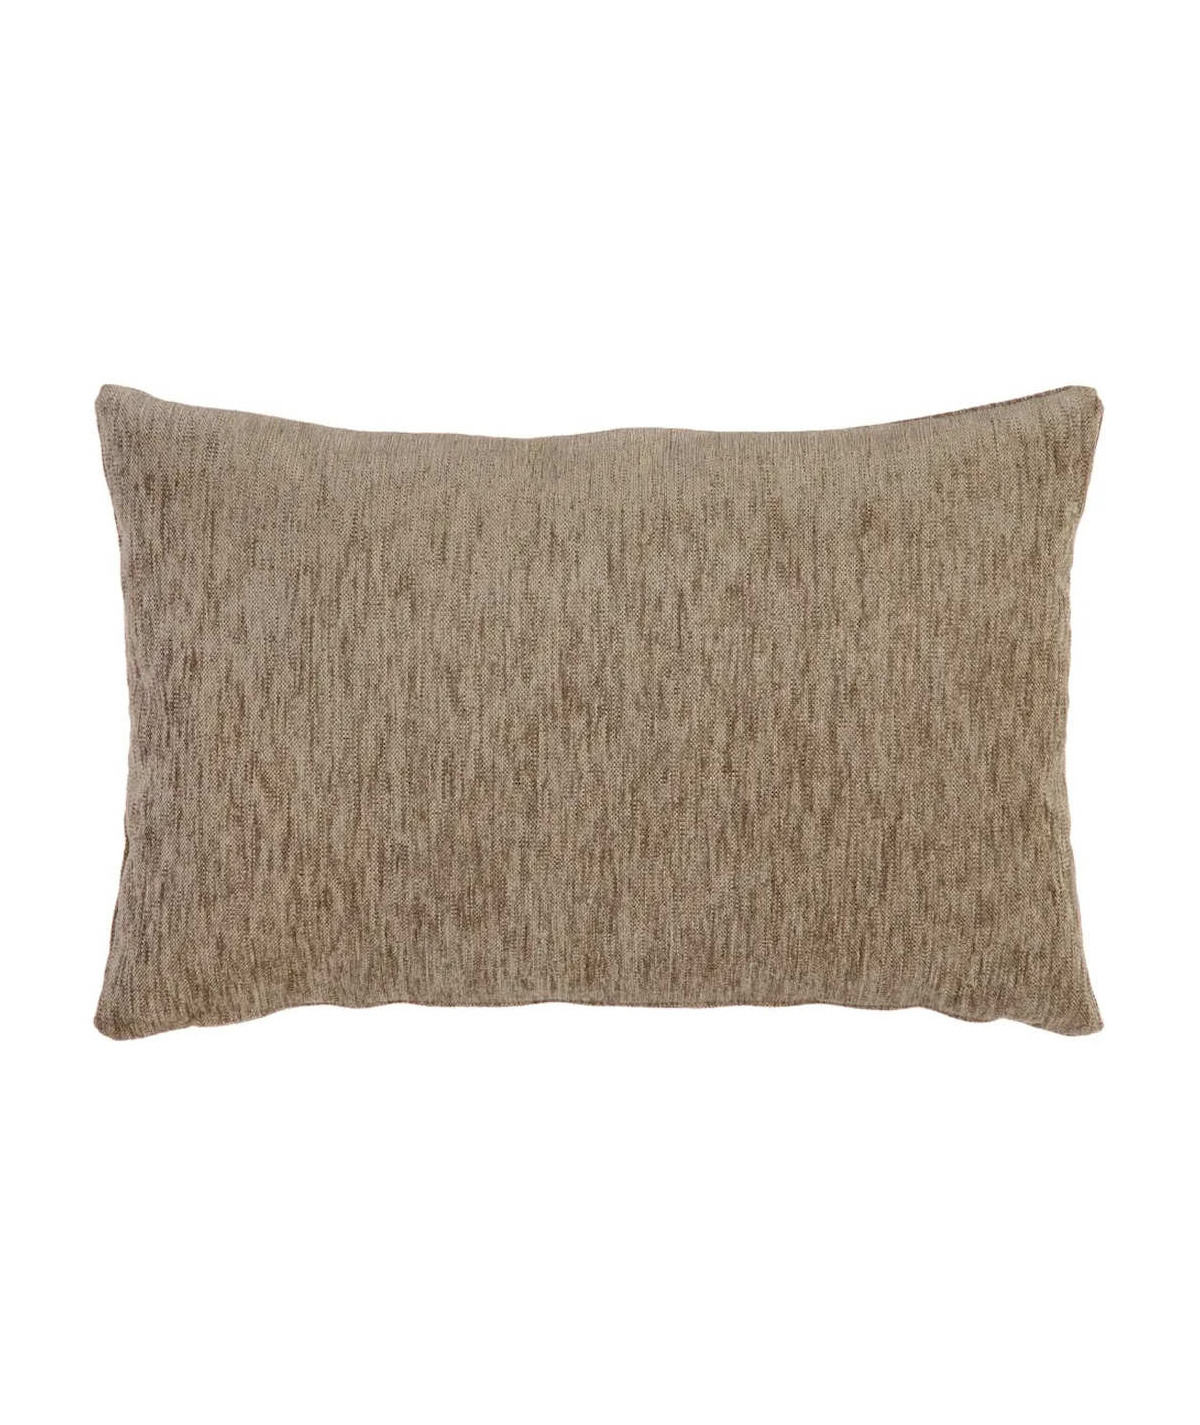 Coussin tissu chiné taupe 40x60 cm Yesdeko